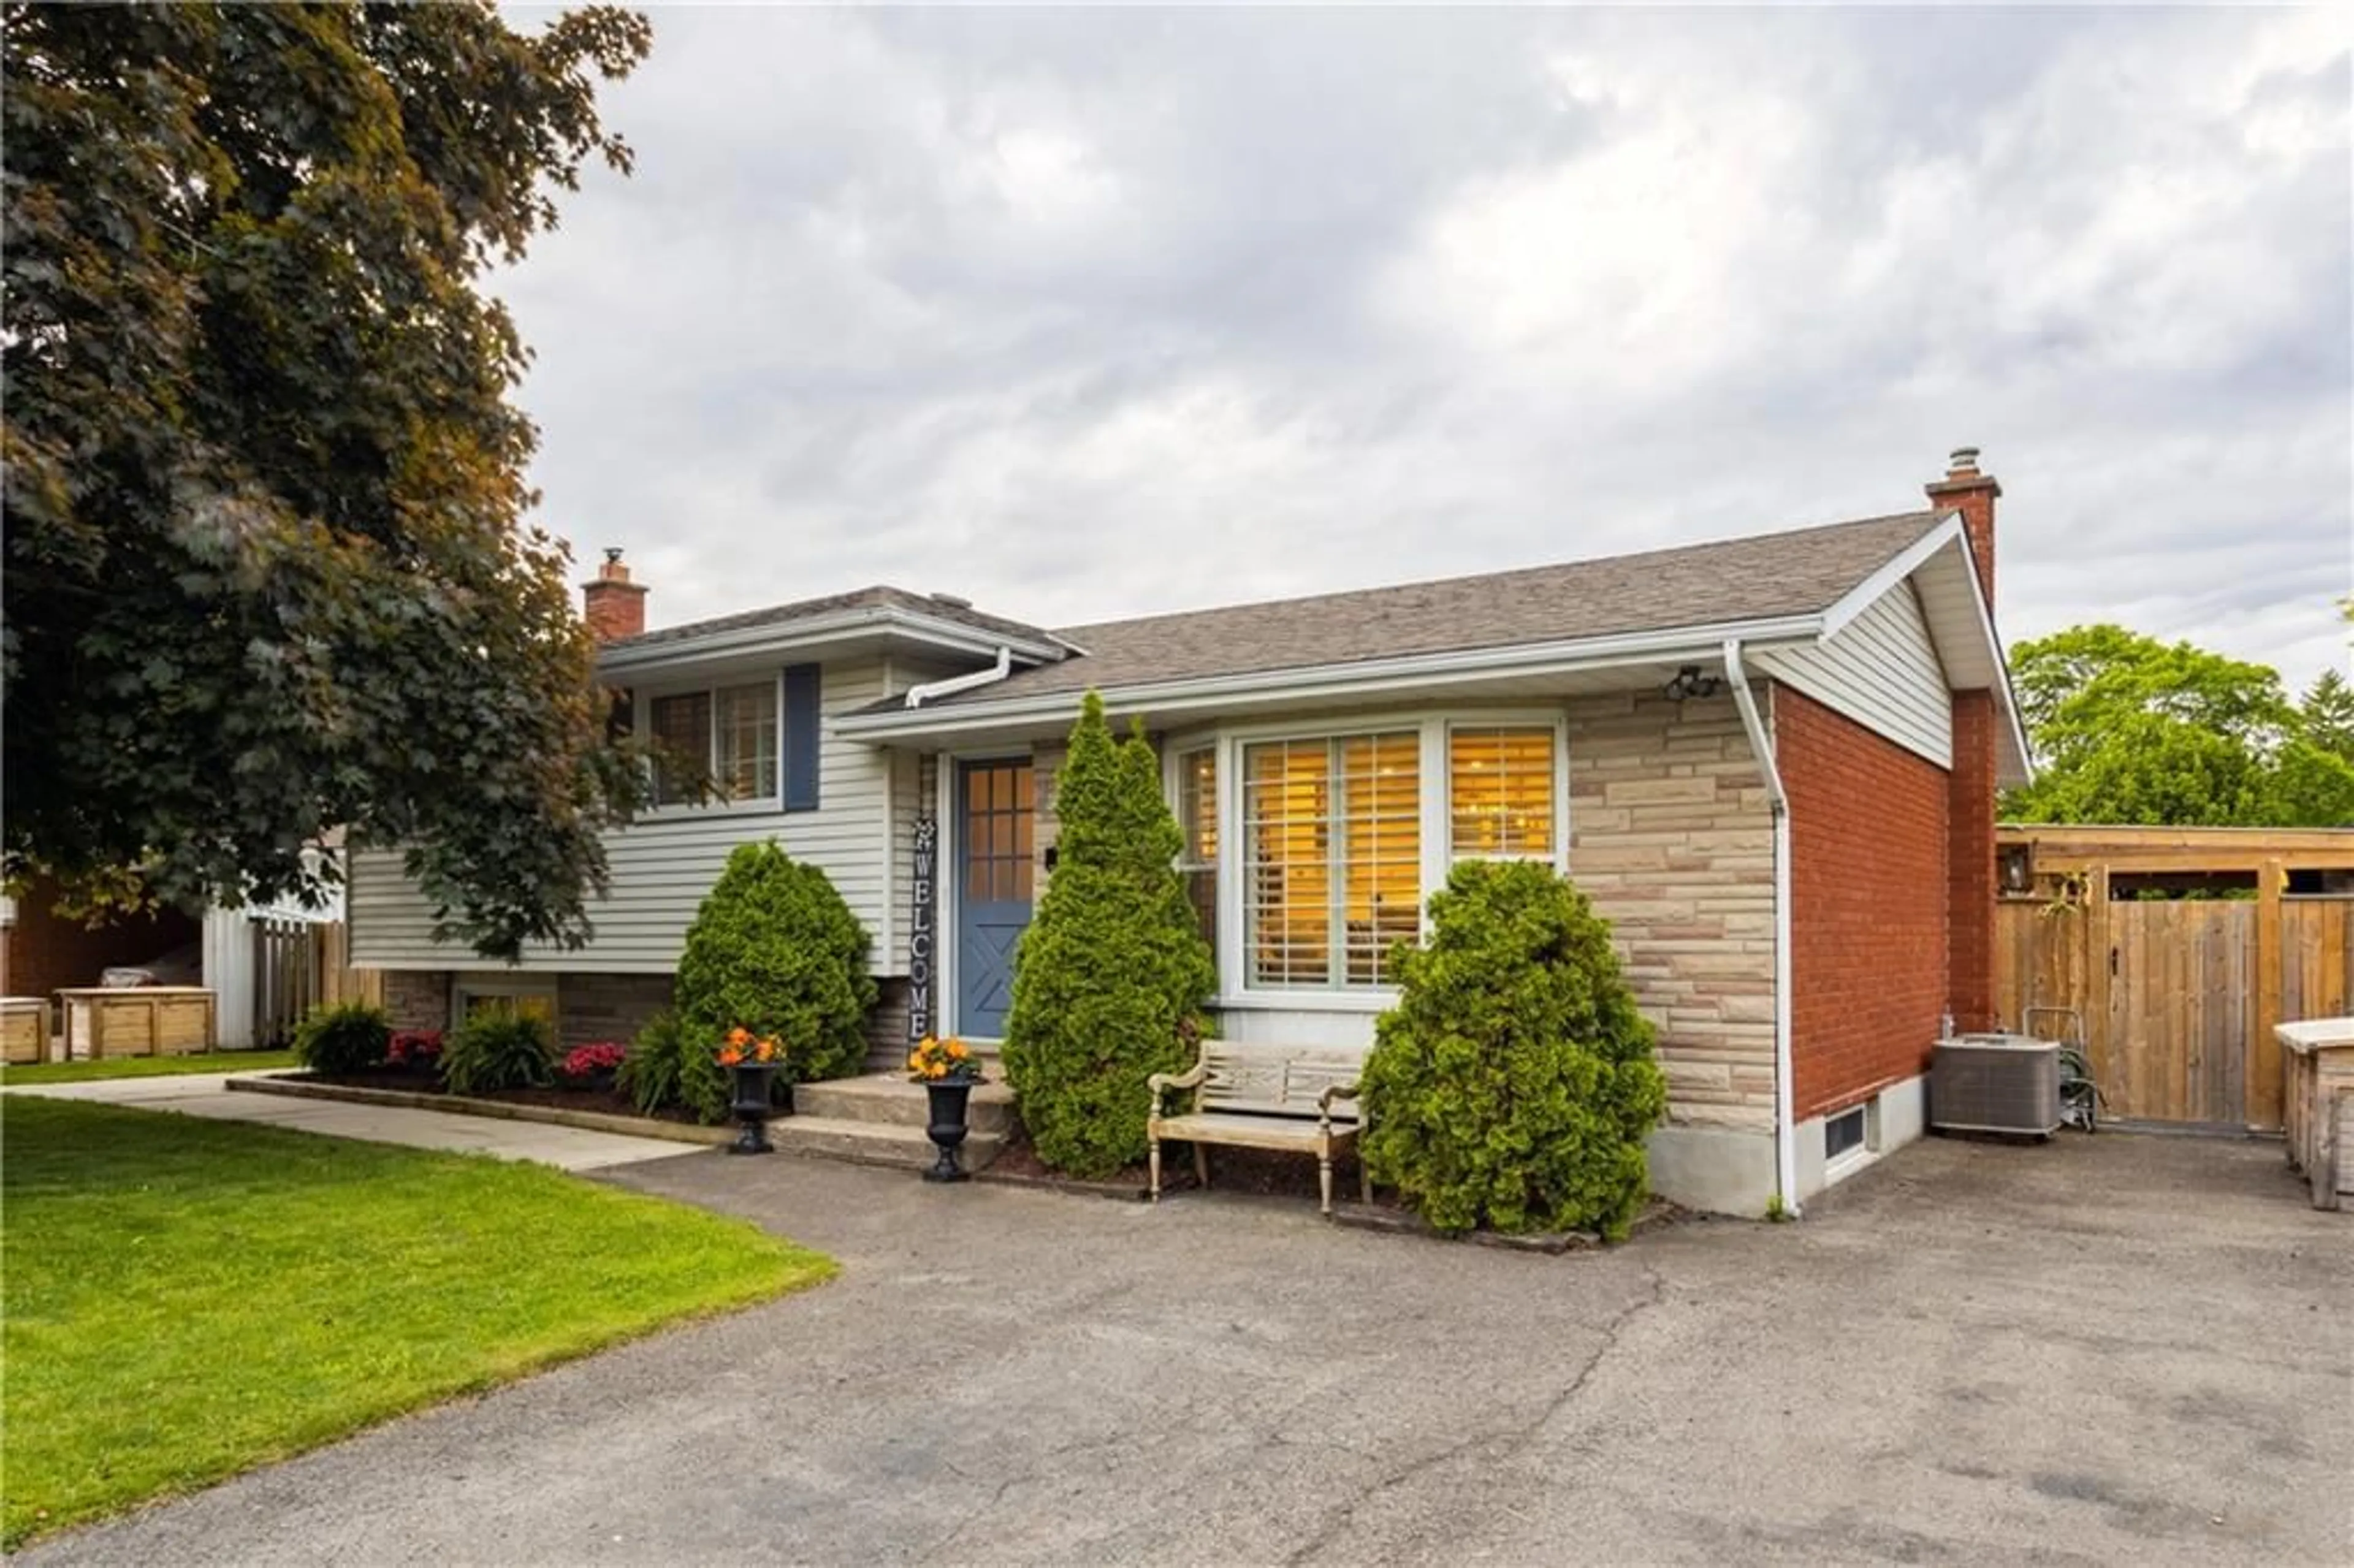 Frontside or backside of a home for 65 TRELAWNE Dr, St. Catharines Ontario L2M 2H1